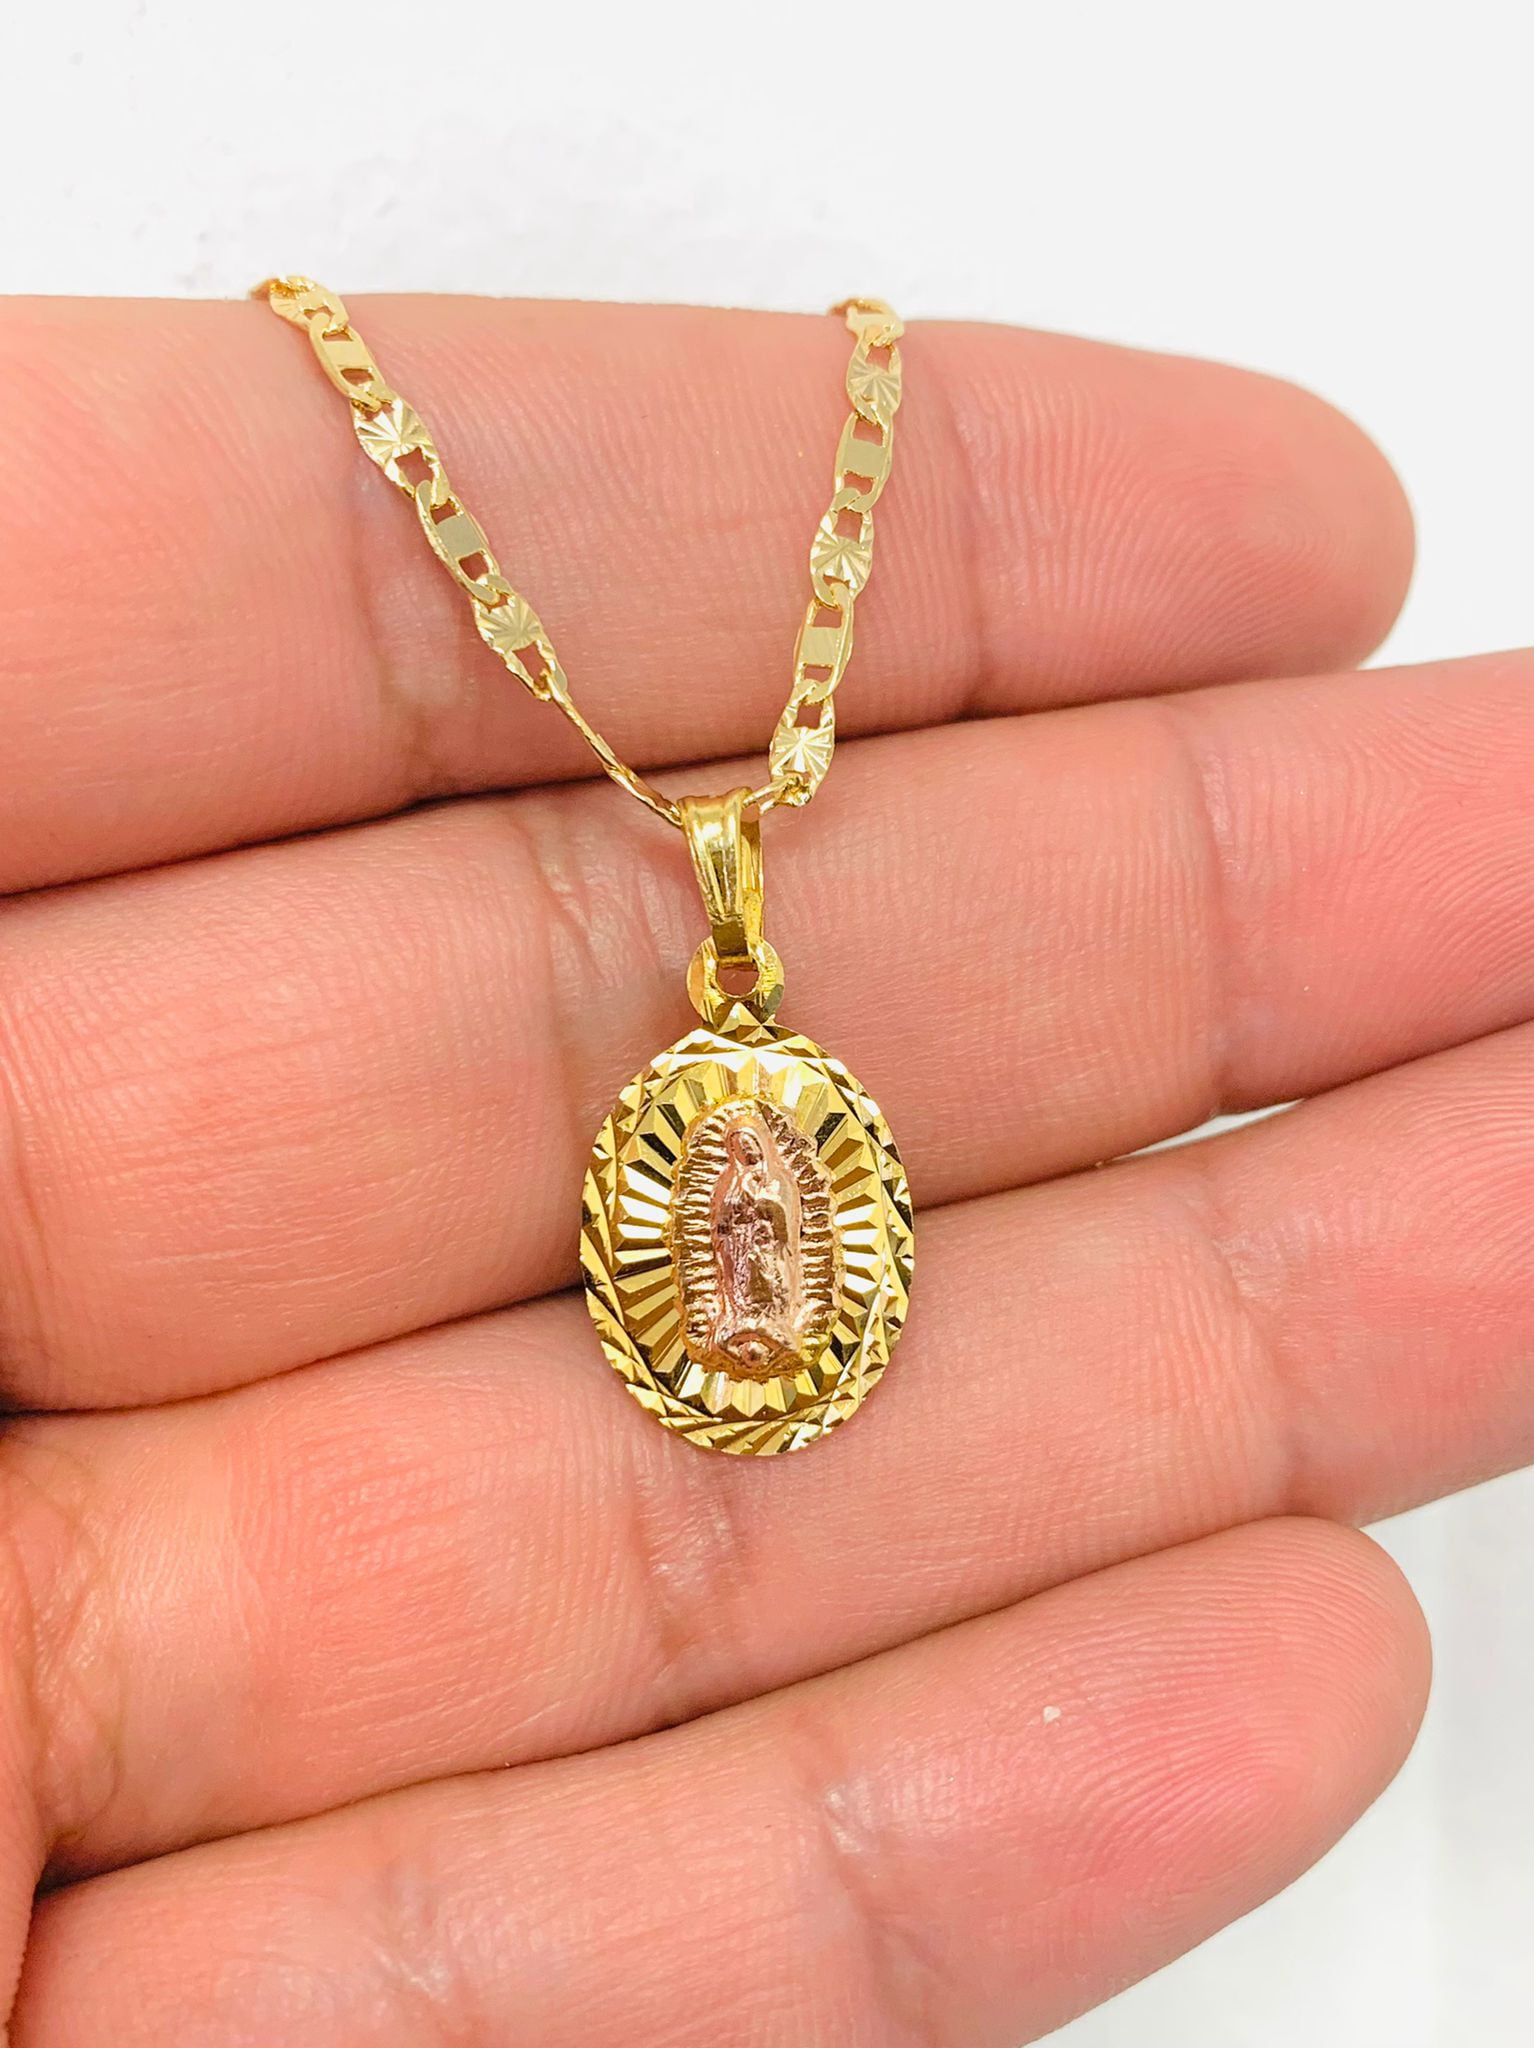 Our Lady of Guadalupe Handmade Necklace Catholic Christian Religious Jewelry  Medal Pendant